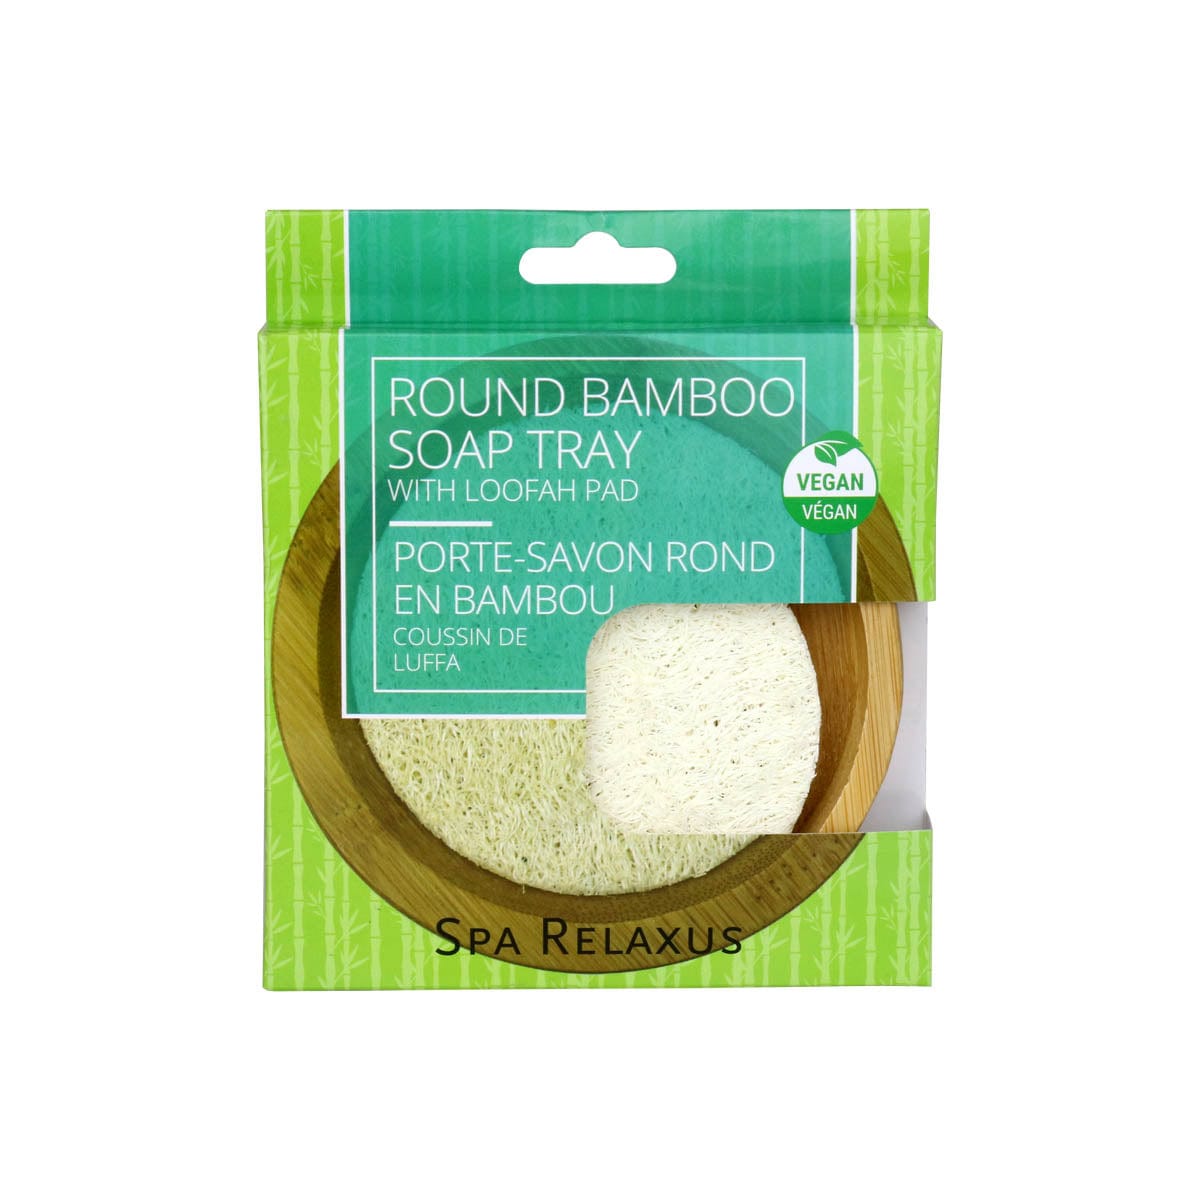 Round Bamboo Soap Tray with Loofah Pad packaging